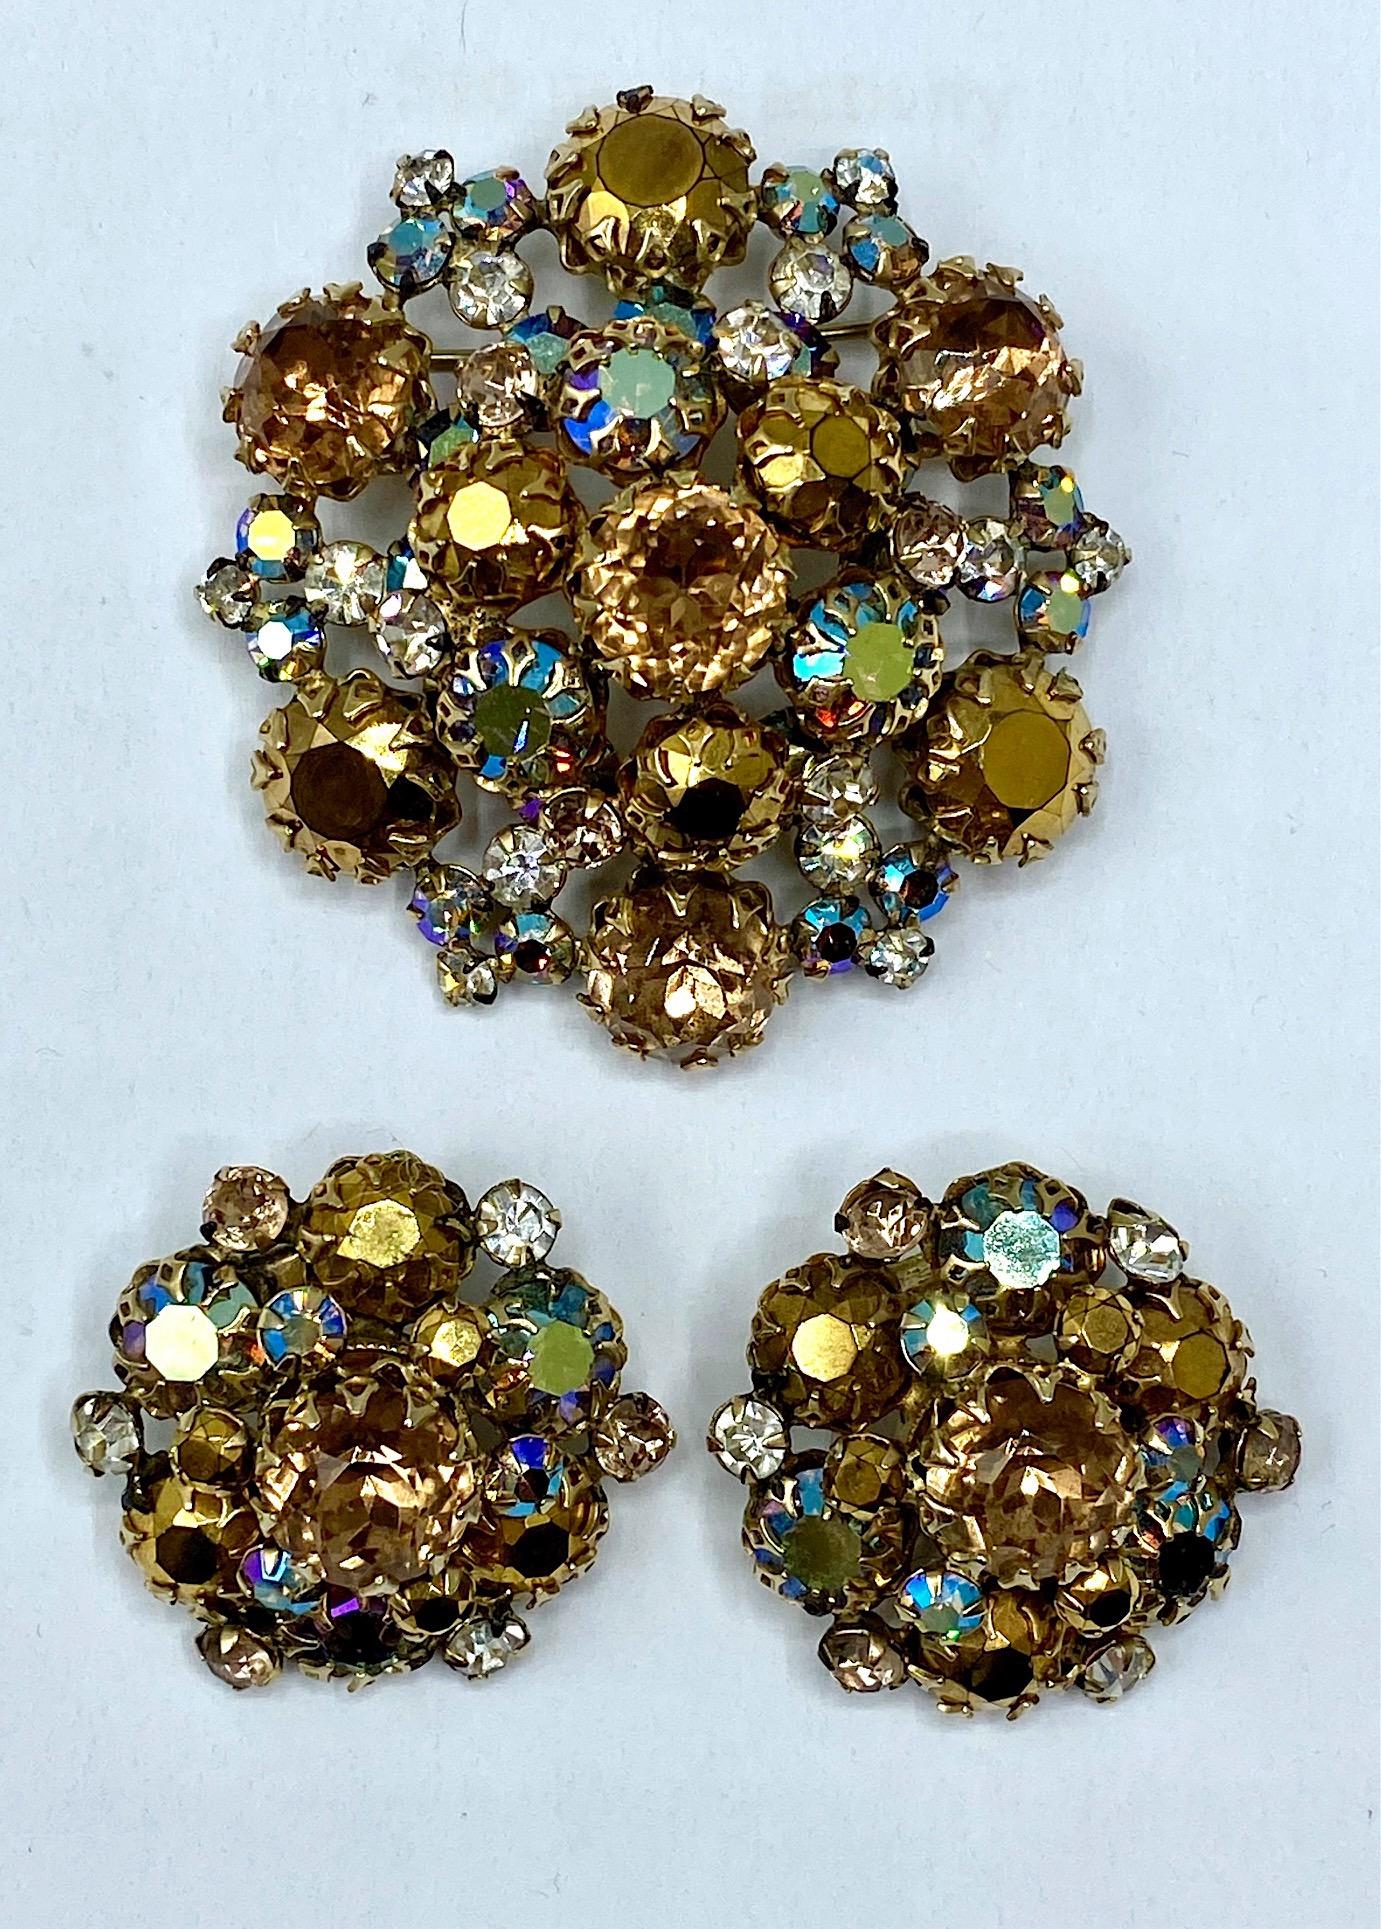 A stunning 1950s rhinestone brooch and earring set by famous rhinestone jewelry company Schreiner of New York. They were famous for their unique designs and innovative color combinations. Frequently working with and having the exclusivity with